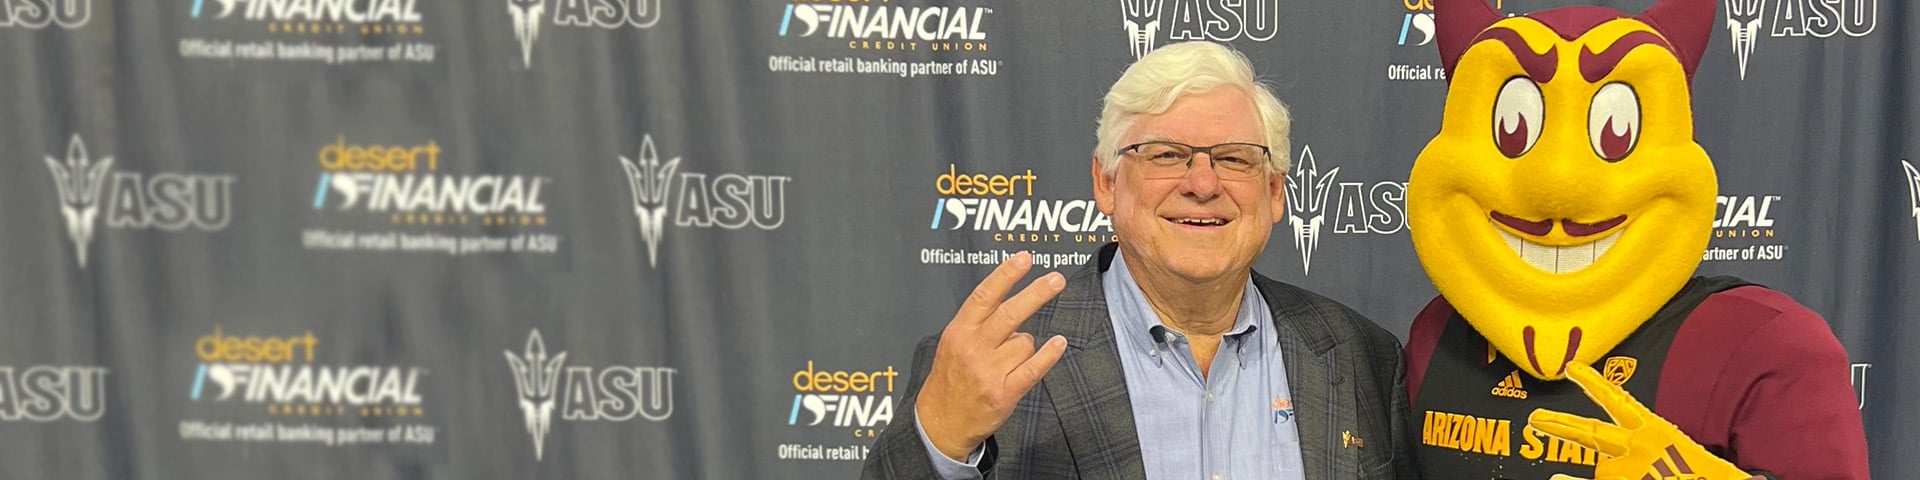 Jeff Meshey (left) proudly displaying the 'Fork 'em Devils' hand sign, standing alongside Sparky the Sun Devil Mascot, against a backdrop celebrating the partnership between Desert Financial and Arizona State University.